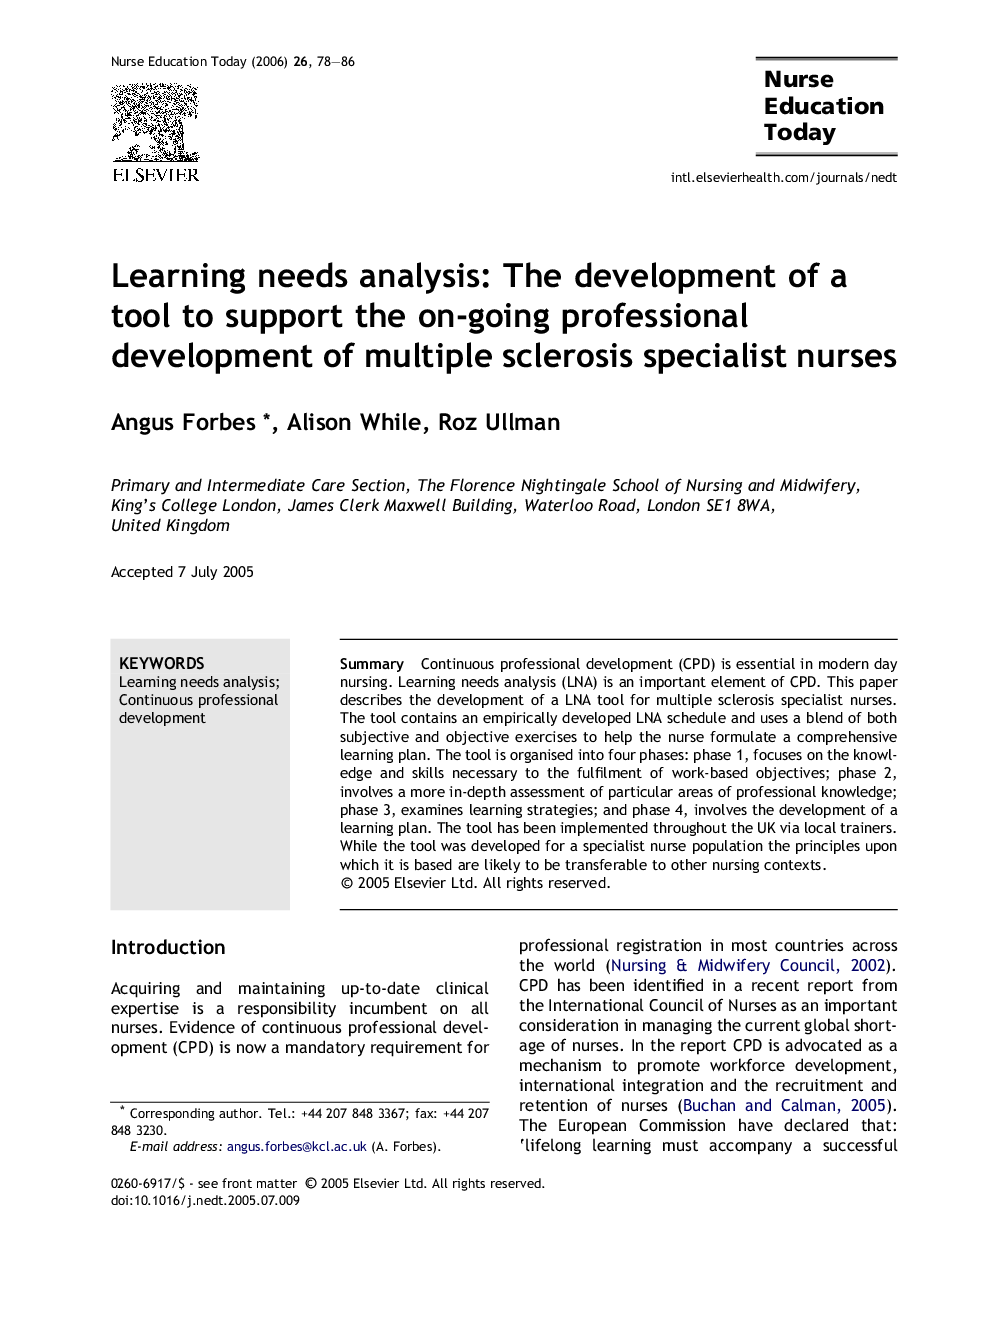 Learning needs analysis: The development of a tool to support the on-going professional development of multiple sclerosis specialist nurses